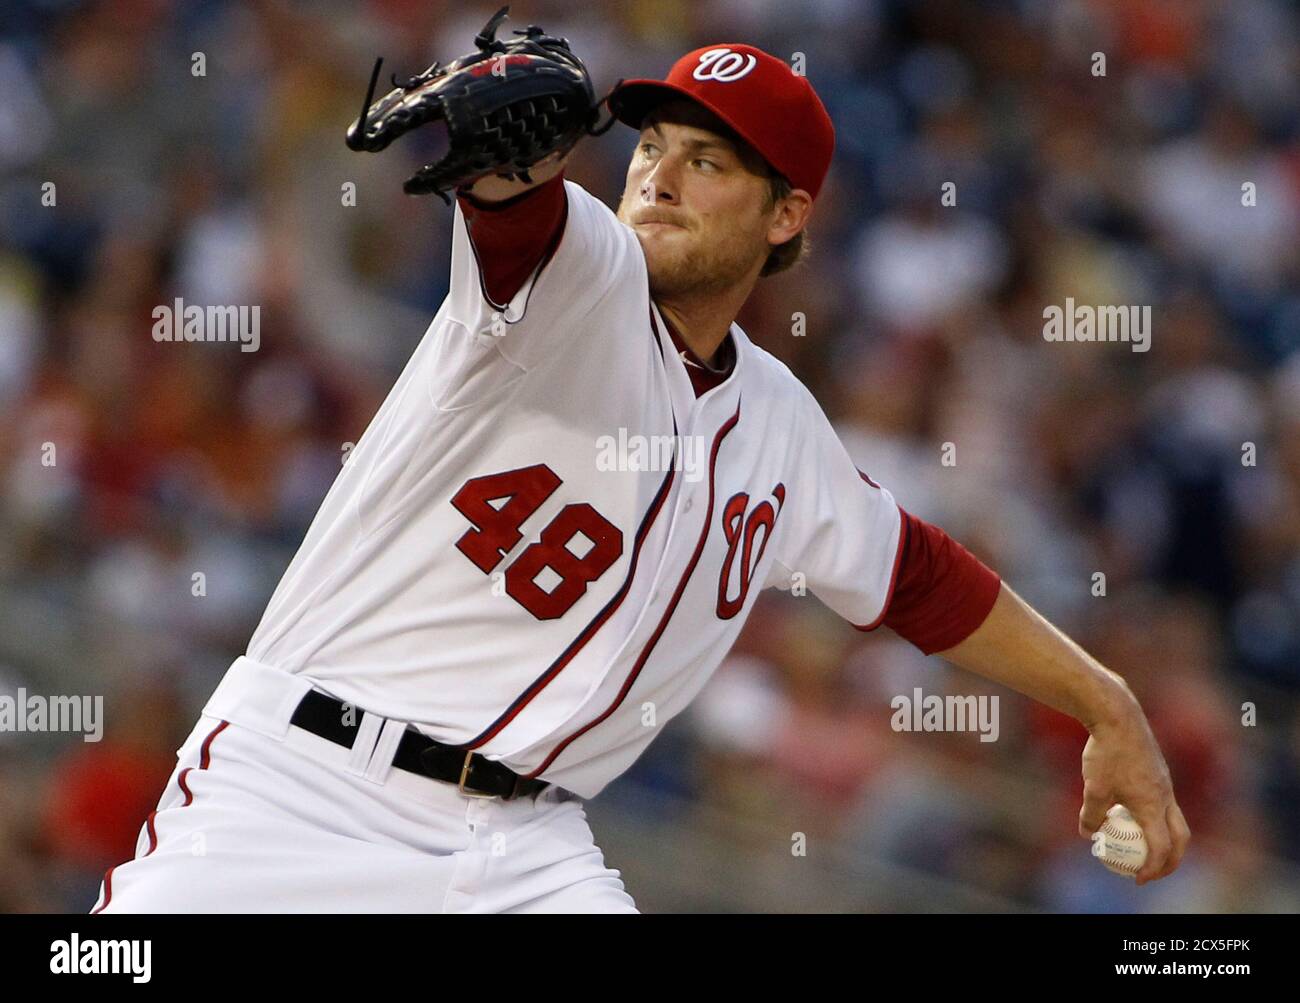 Washington Nationals pitcher Ross Detwiler throws in the first inning of their MLB game against the New York Mets in Washington, August 17, 2012.    REUTERS/Larry Downing  (UNITED STATES - Tags: SPORT BASEBALL) Foto de stock